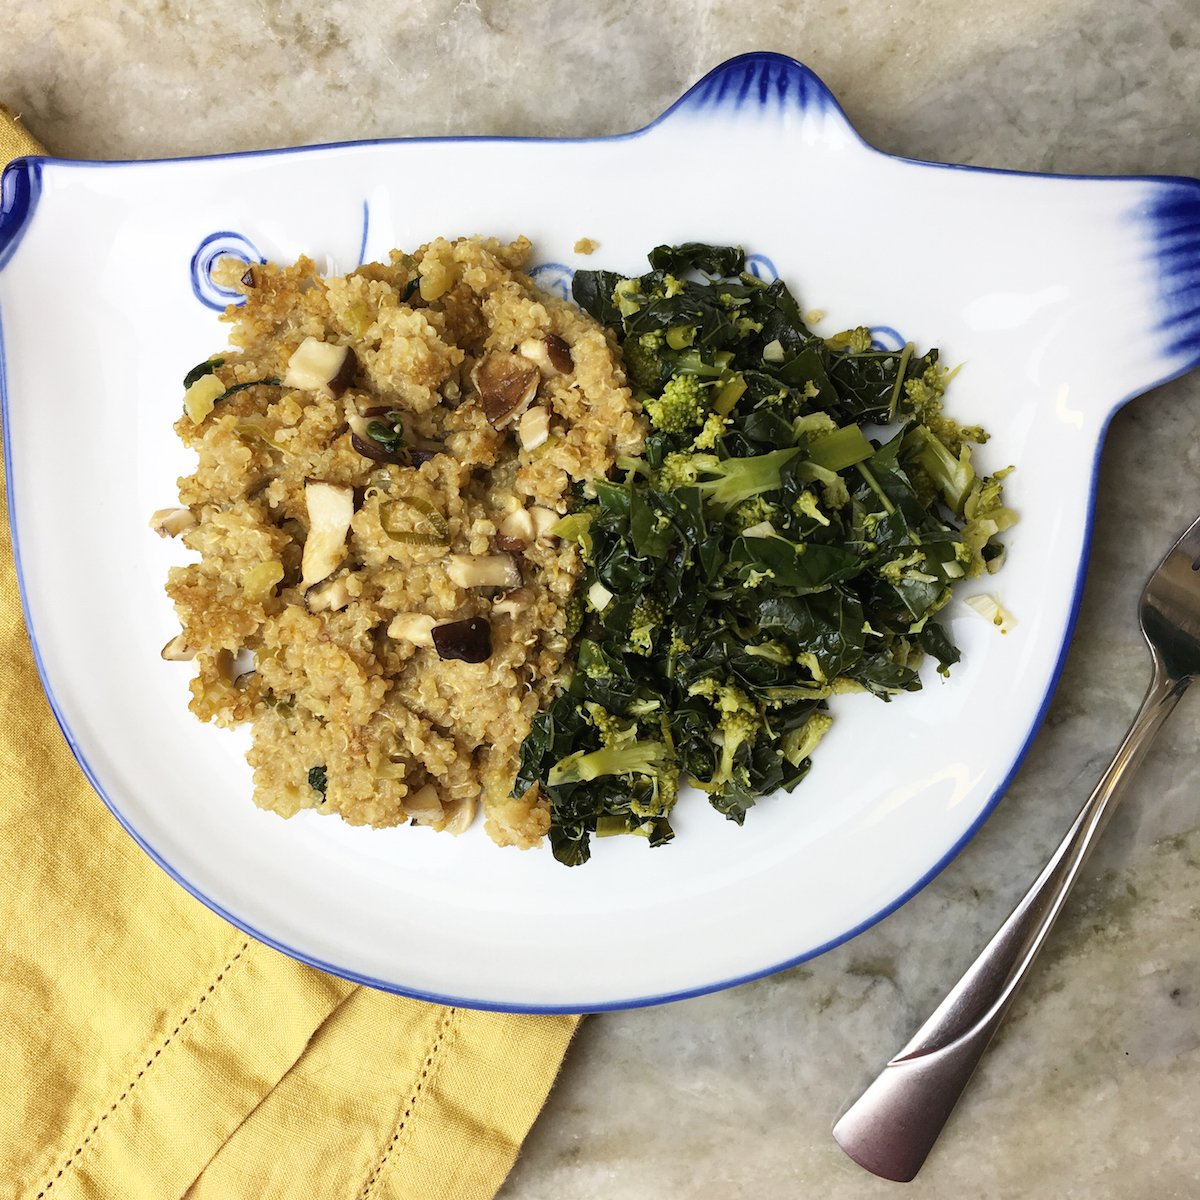 Delicious quinoa and mushroom casserole with some cooked kale and broccoli! 